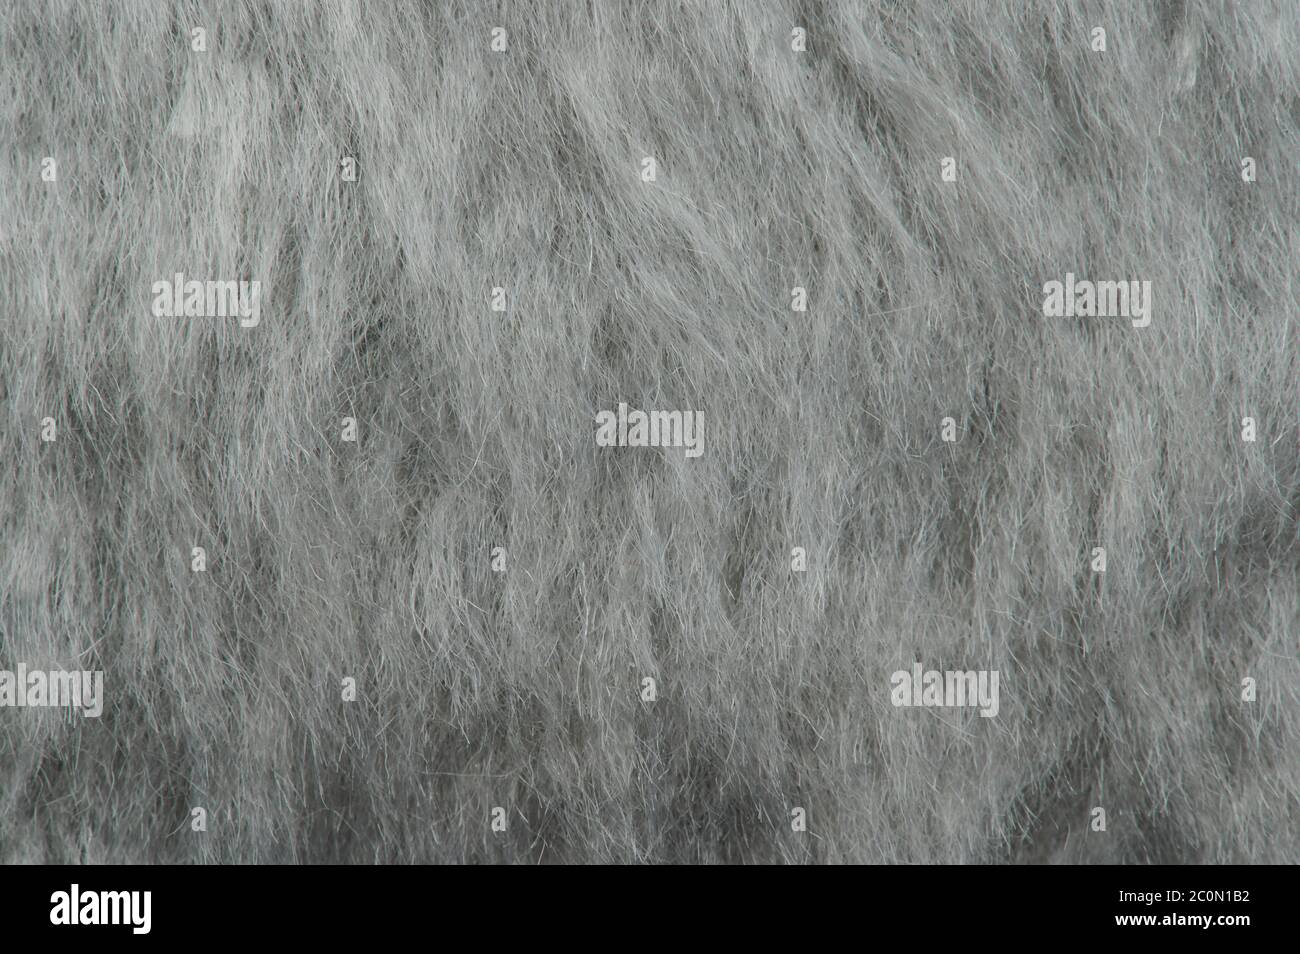 Soft furry grey texture background macro close up view Stock Photo